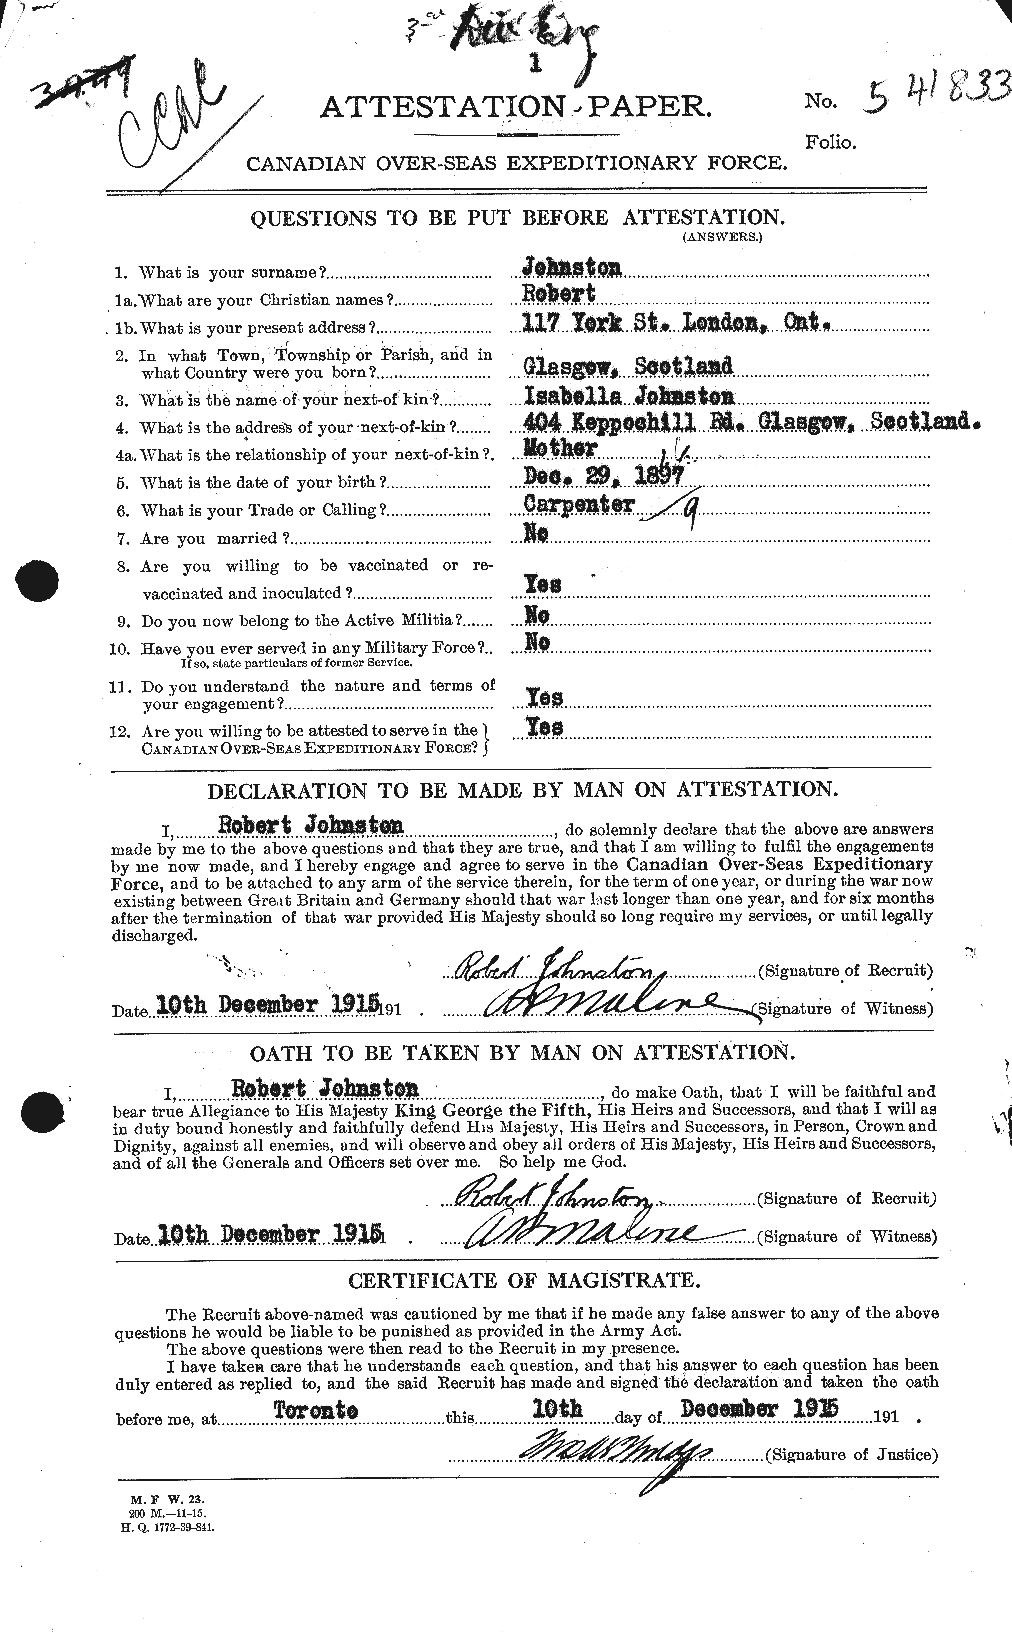 Personnel Records of the First World War - CEF 426980a